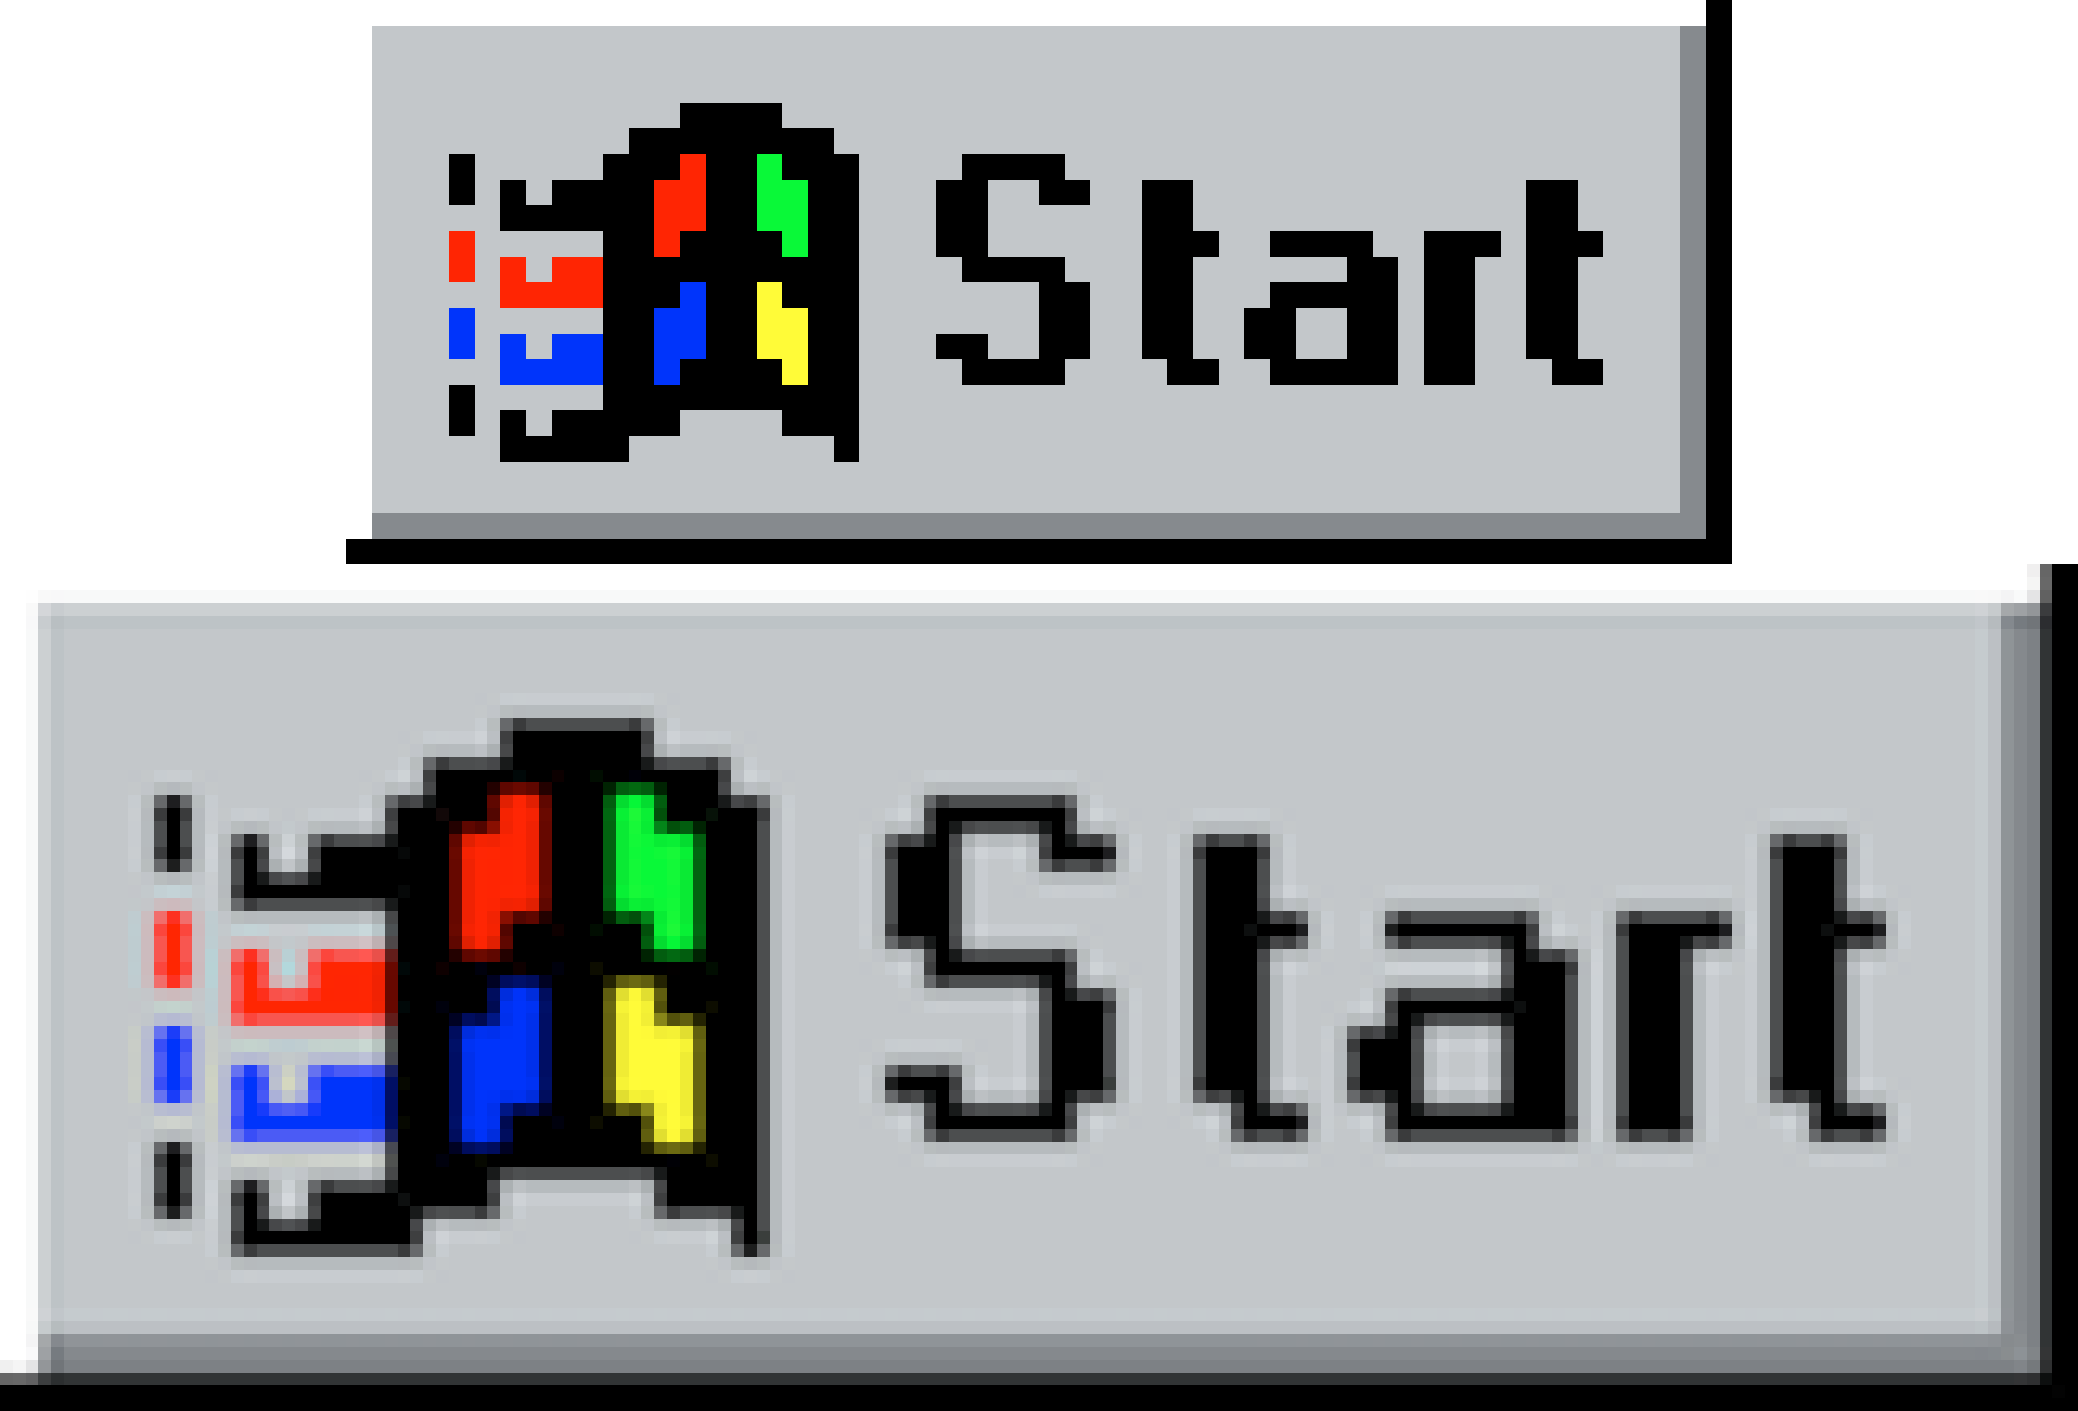 Windows 95 start menu, normal size and blurry scaled up version